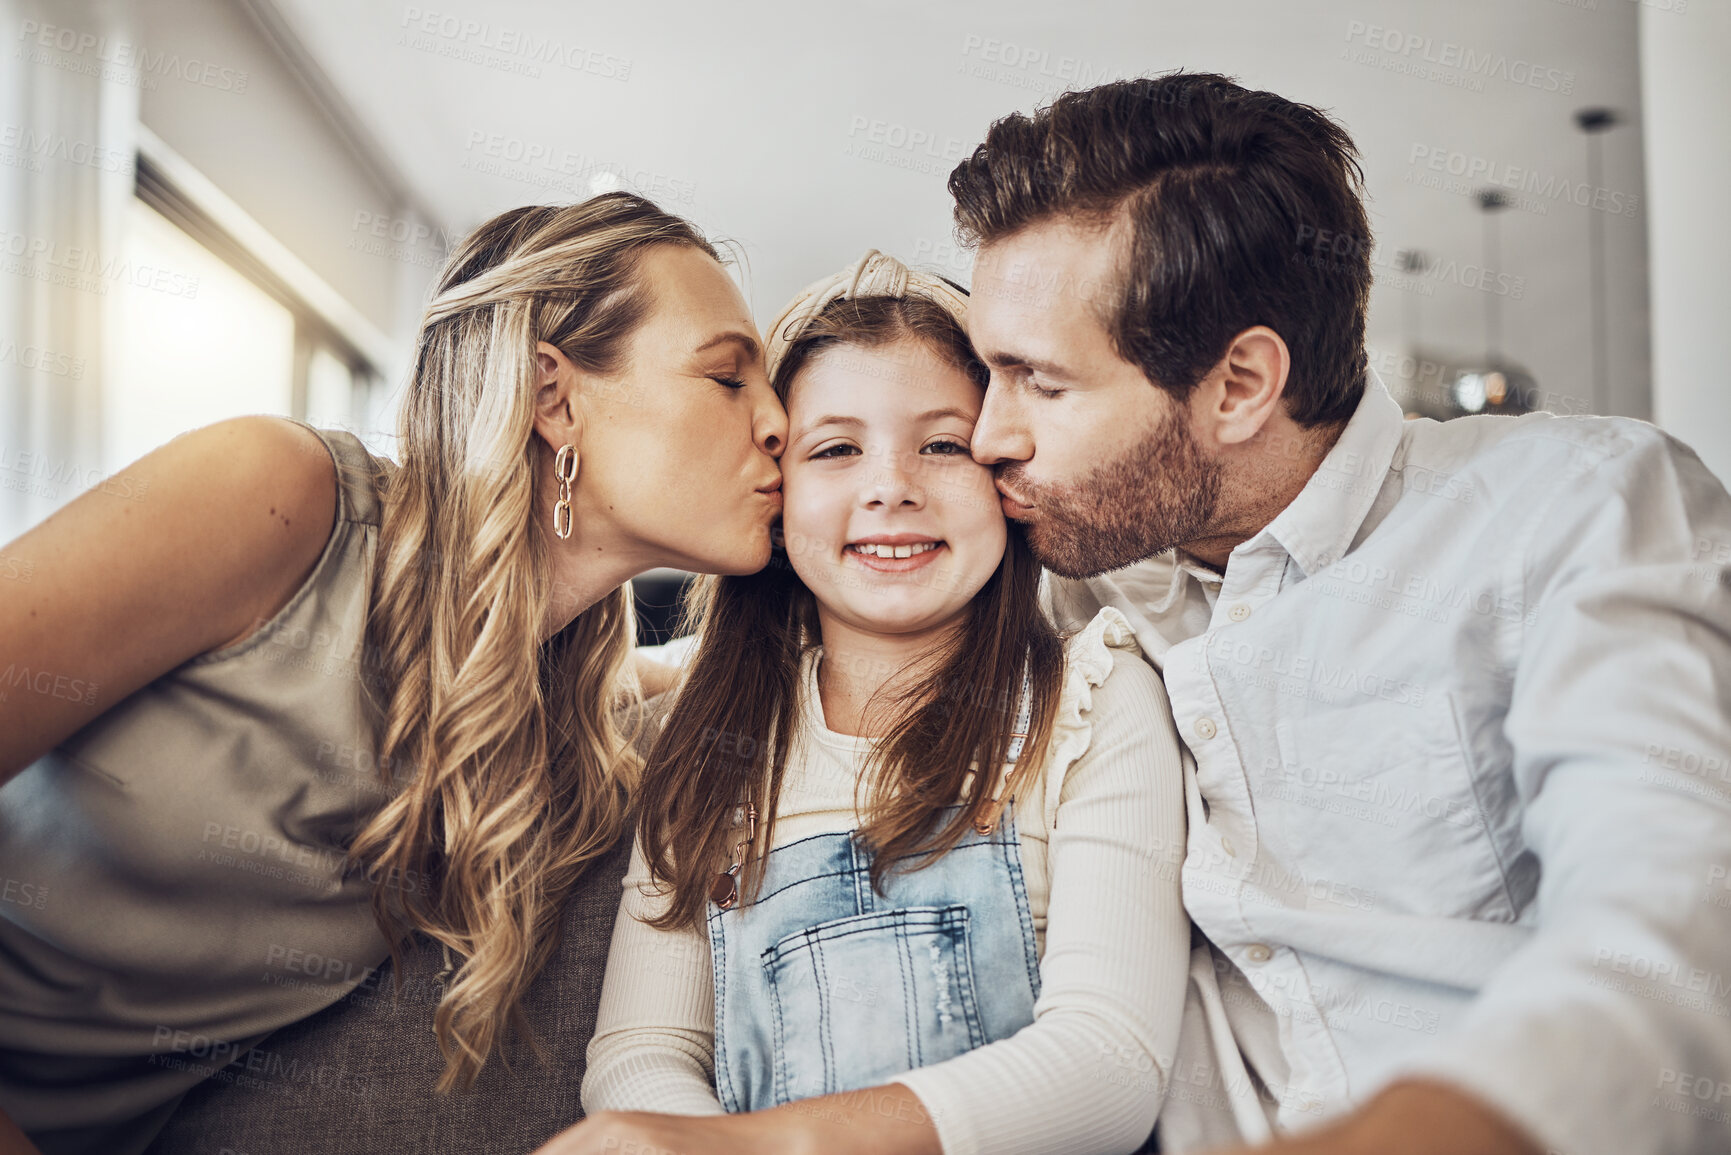 Buy stock photo Portrait, mother or father kiss a girl or child as a happy family in living room bonding in Australia with love or care. Relax, trust or parents smile with kid enjoying quality time on a fun holiday